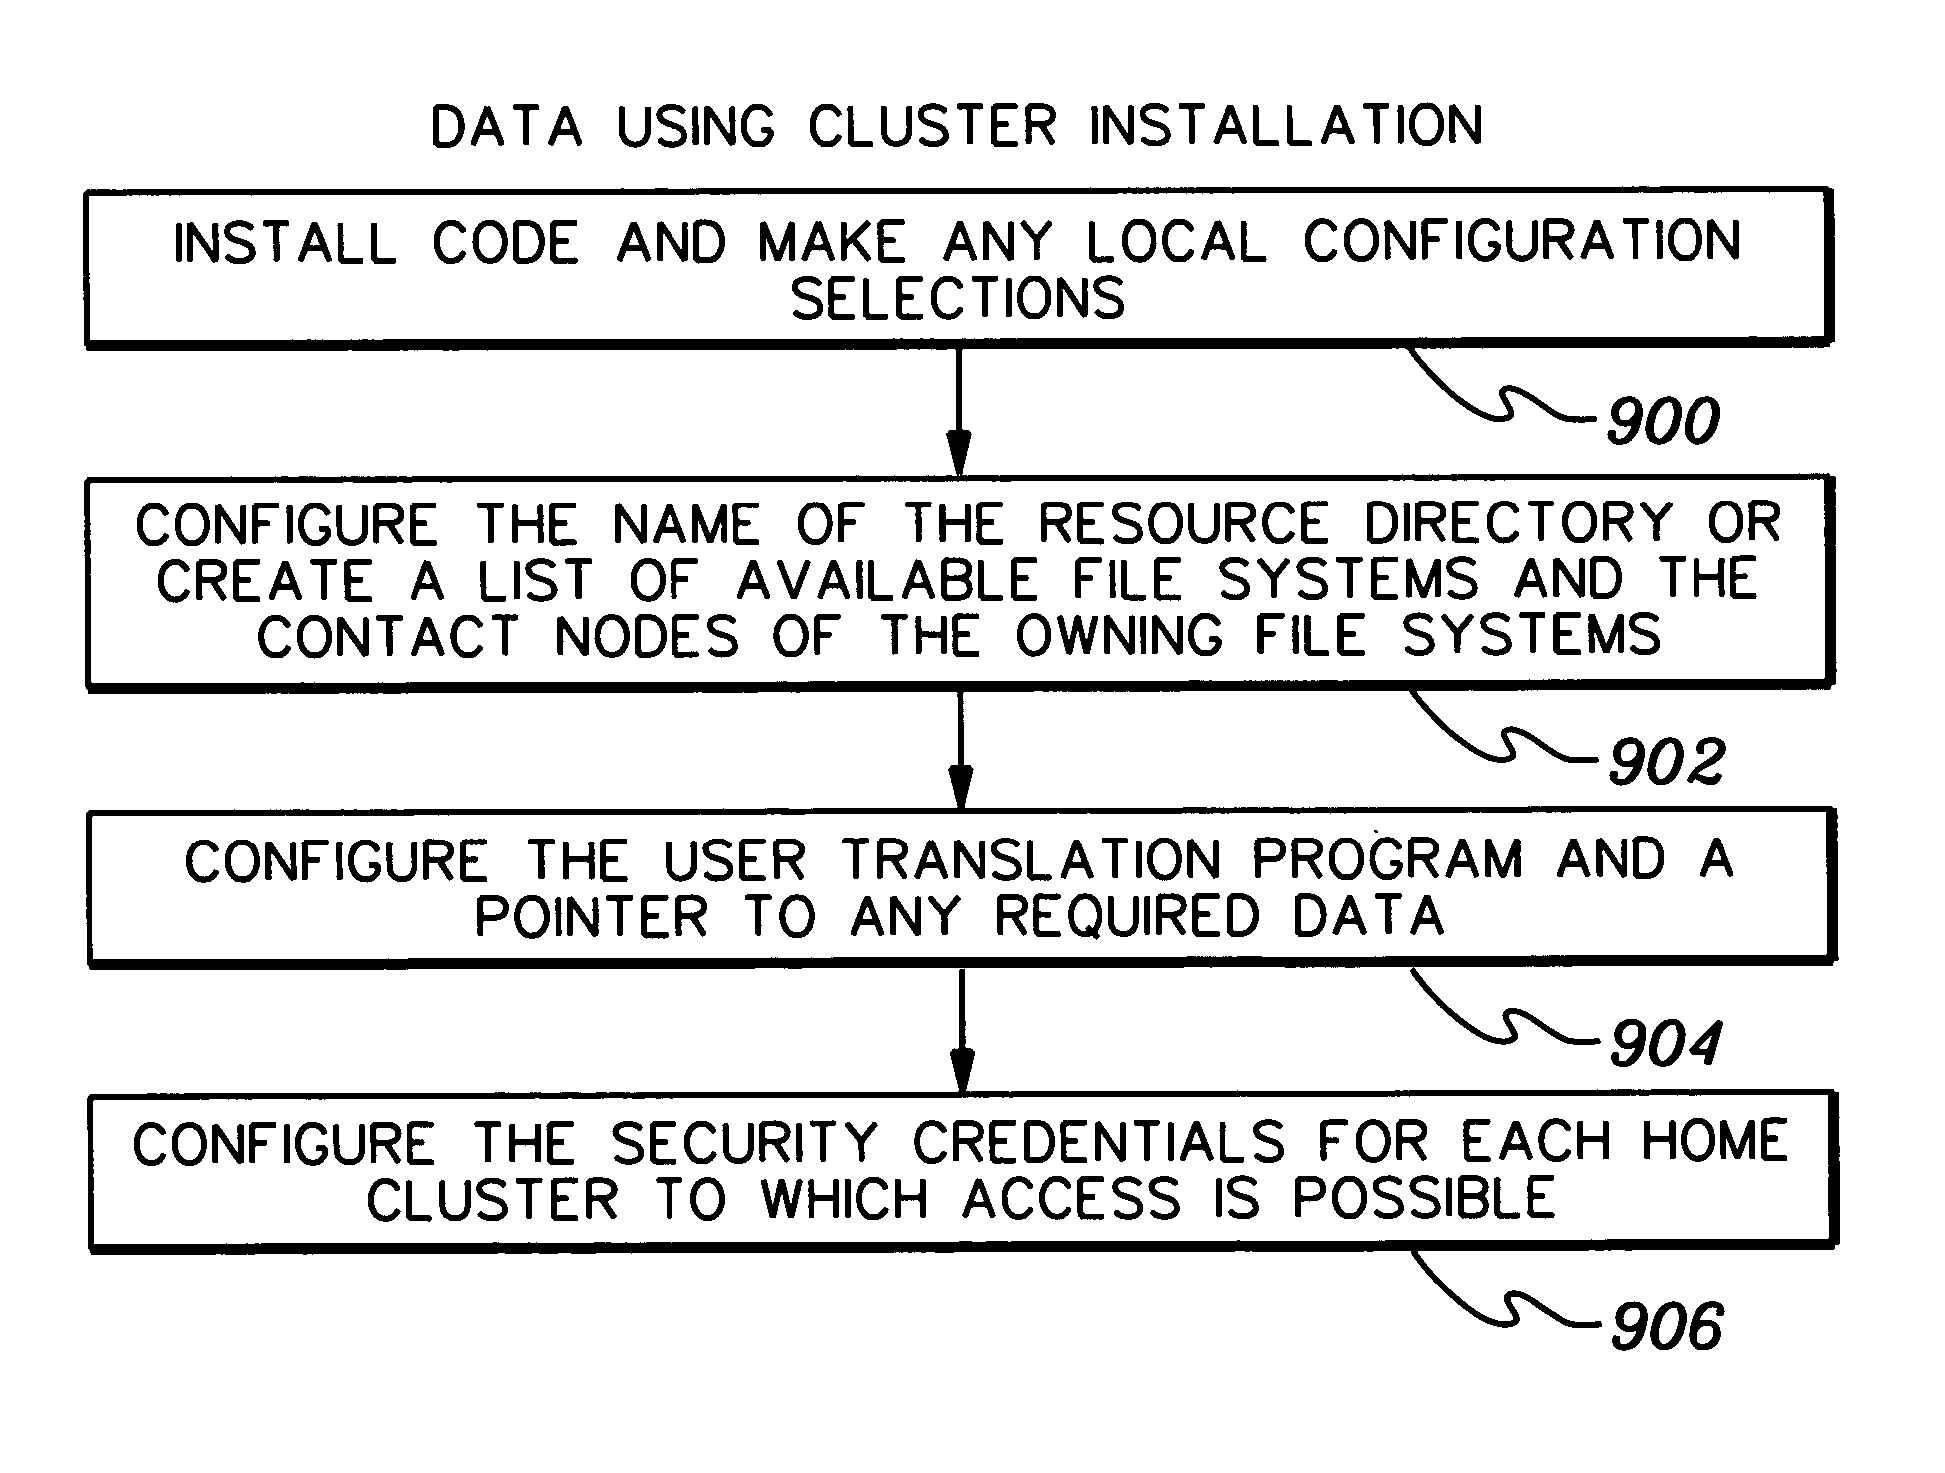 Dynamic management of node clusters to enable data sharing